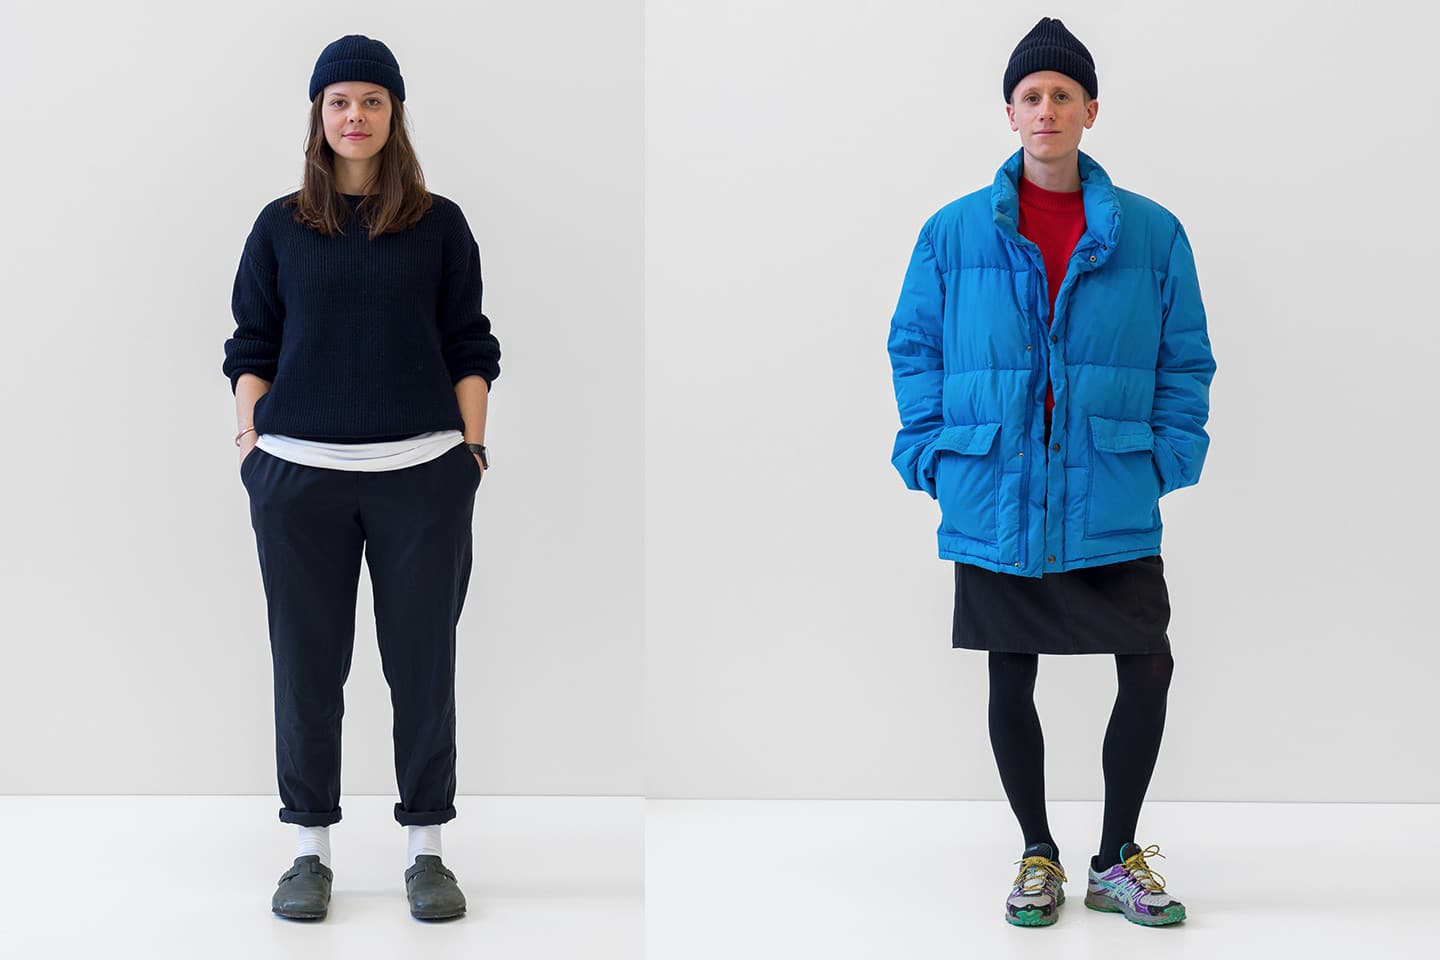 Why This Artist Swapped Clothes with 100 People